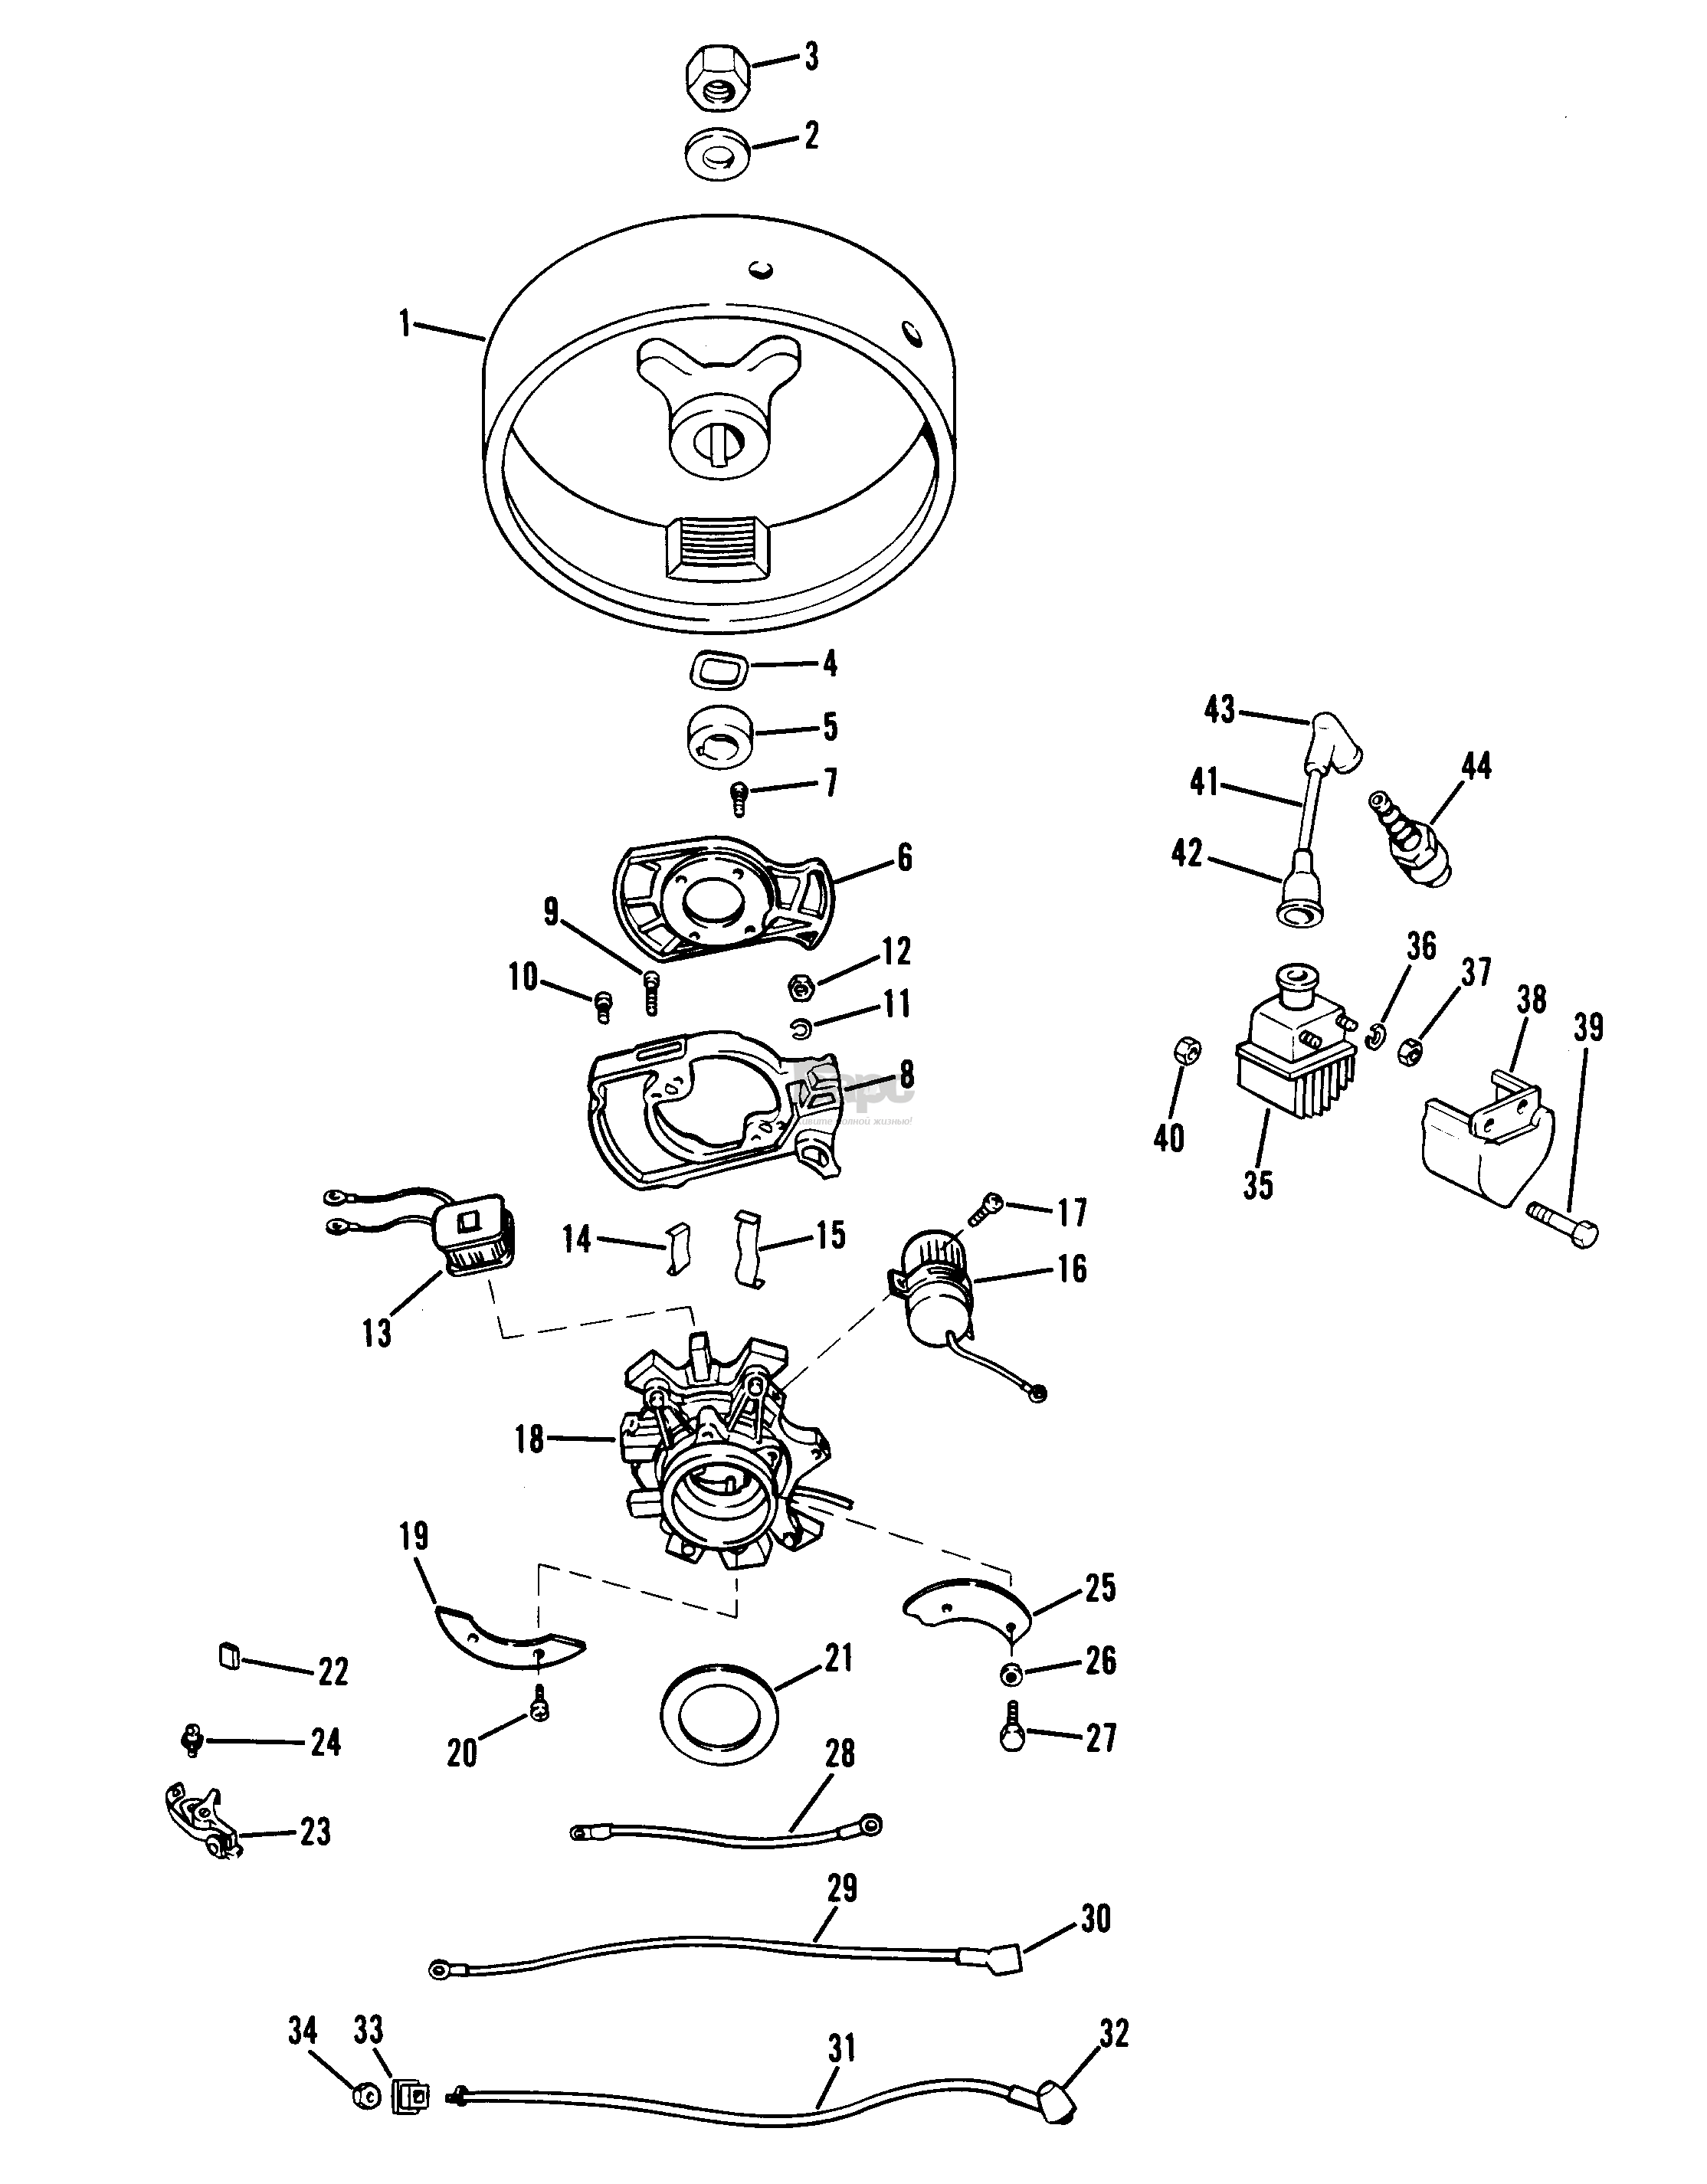 FLYWHEEL AND IGNITION COMPONENTS